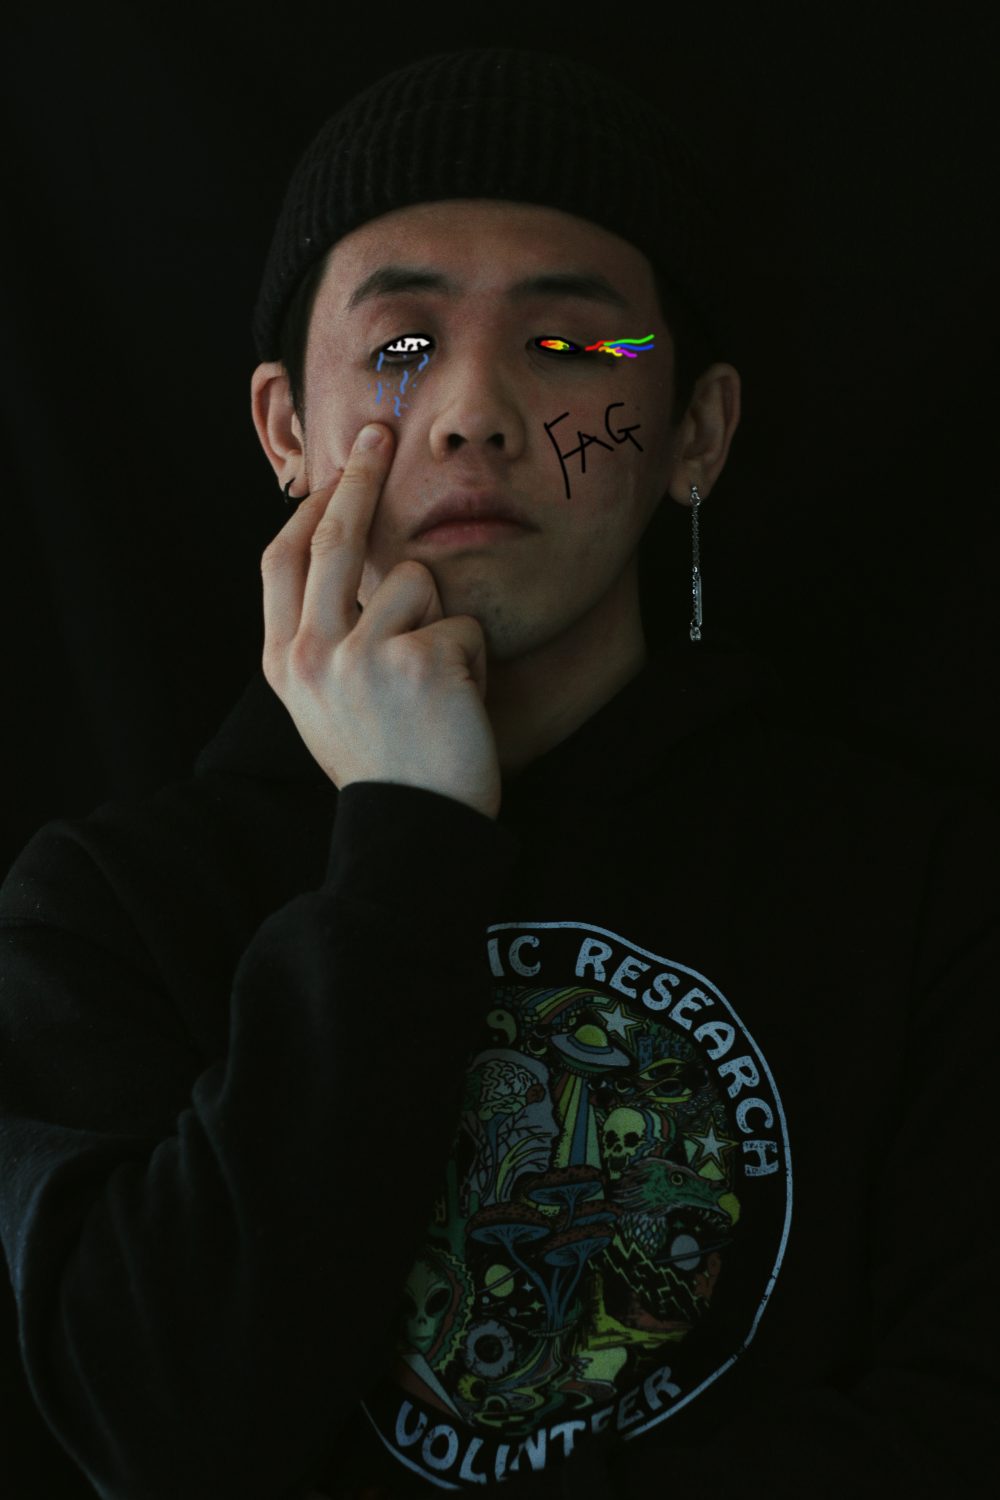 A young man standing in front of a solid black background. Rainbow tears are graphically drawn coming out of the right eye, and there are blue tears coming out on the left. Model is posed in a neutral stance with middle finger pulling down the eye with blue tears. "F*g" is written on his face.